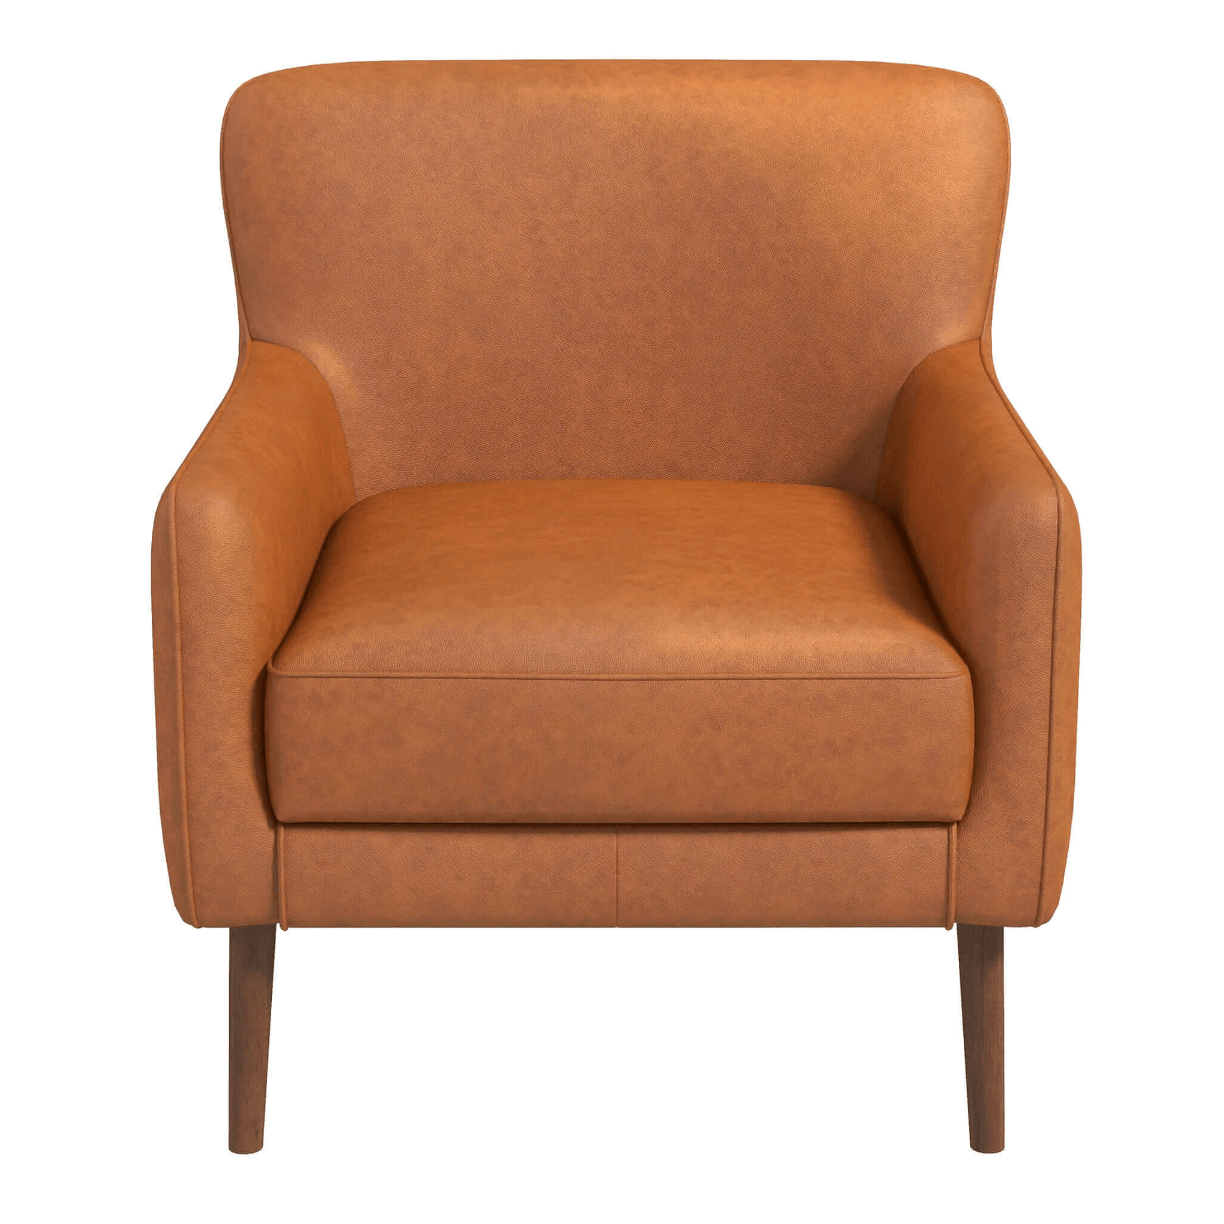 Claire MCM Style Genuine Leather Lounge Chair - Revel Sofa 